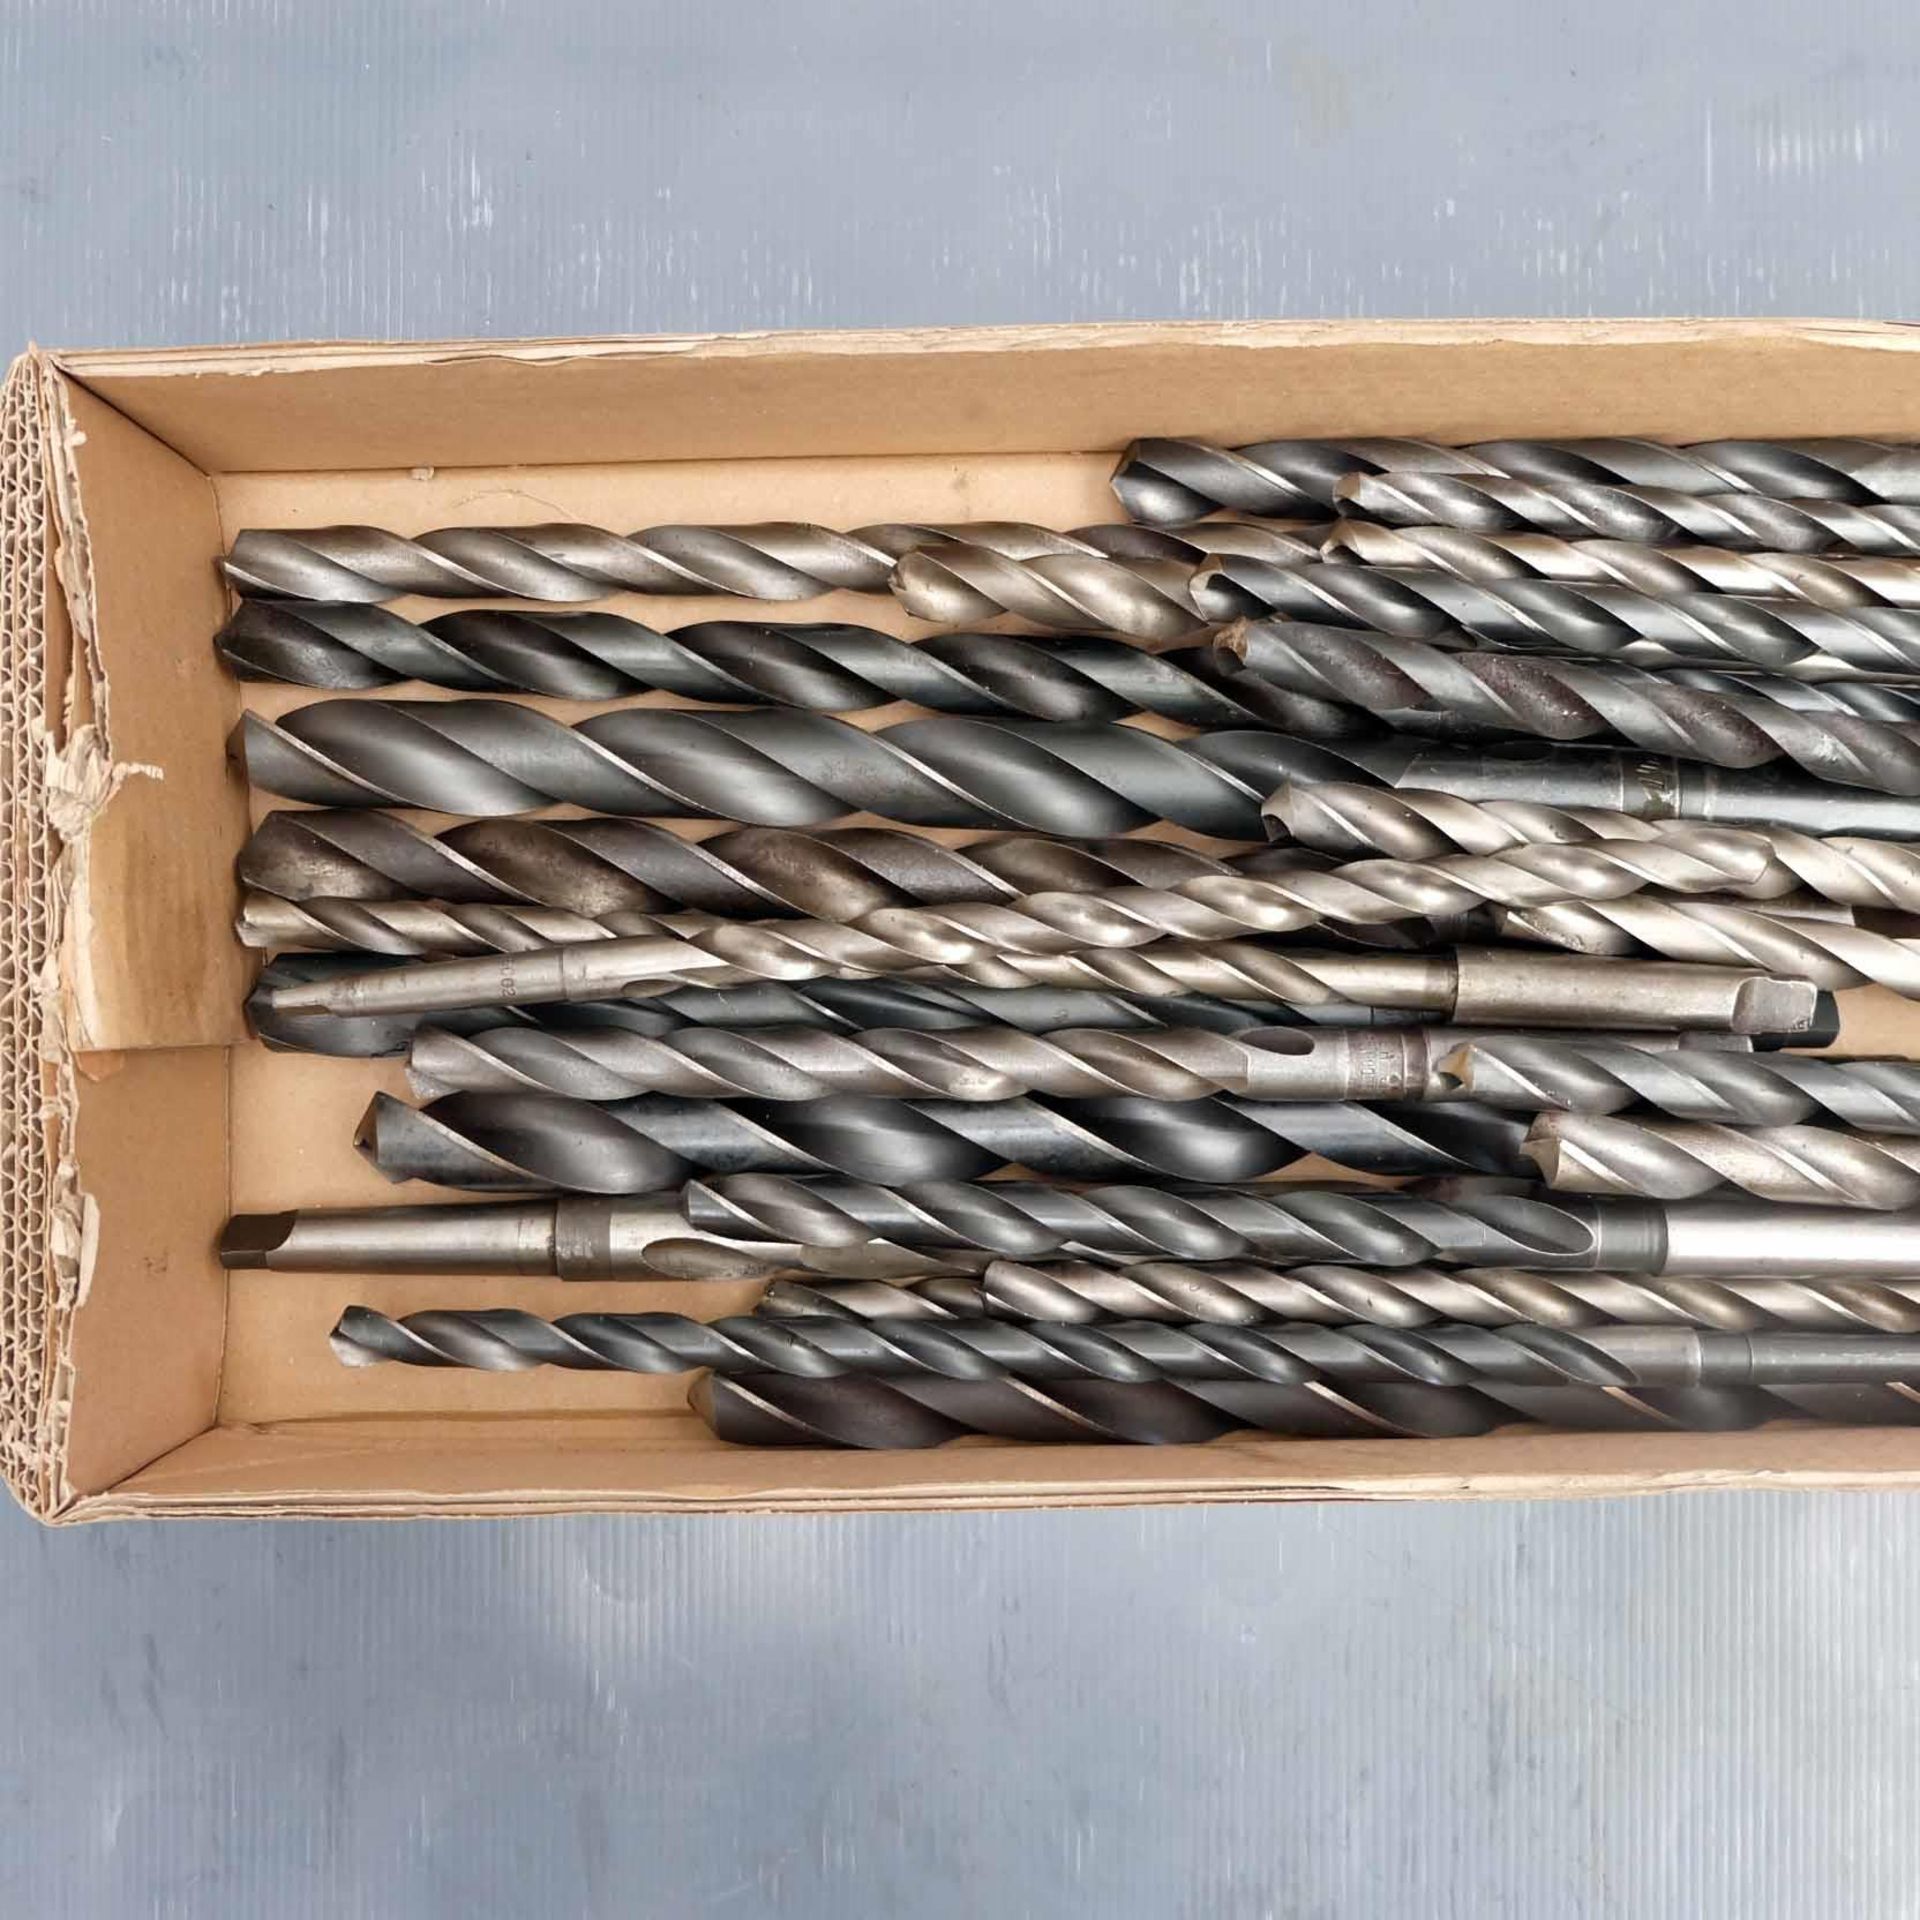 Quantity of Long Series Twist Drills. Various Imperial Sizes. 1 - 3 MT. - Image 2 of 3